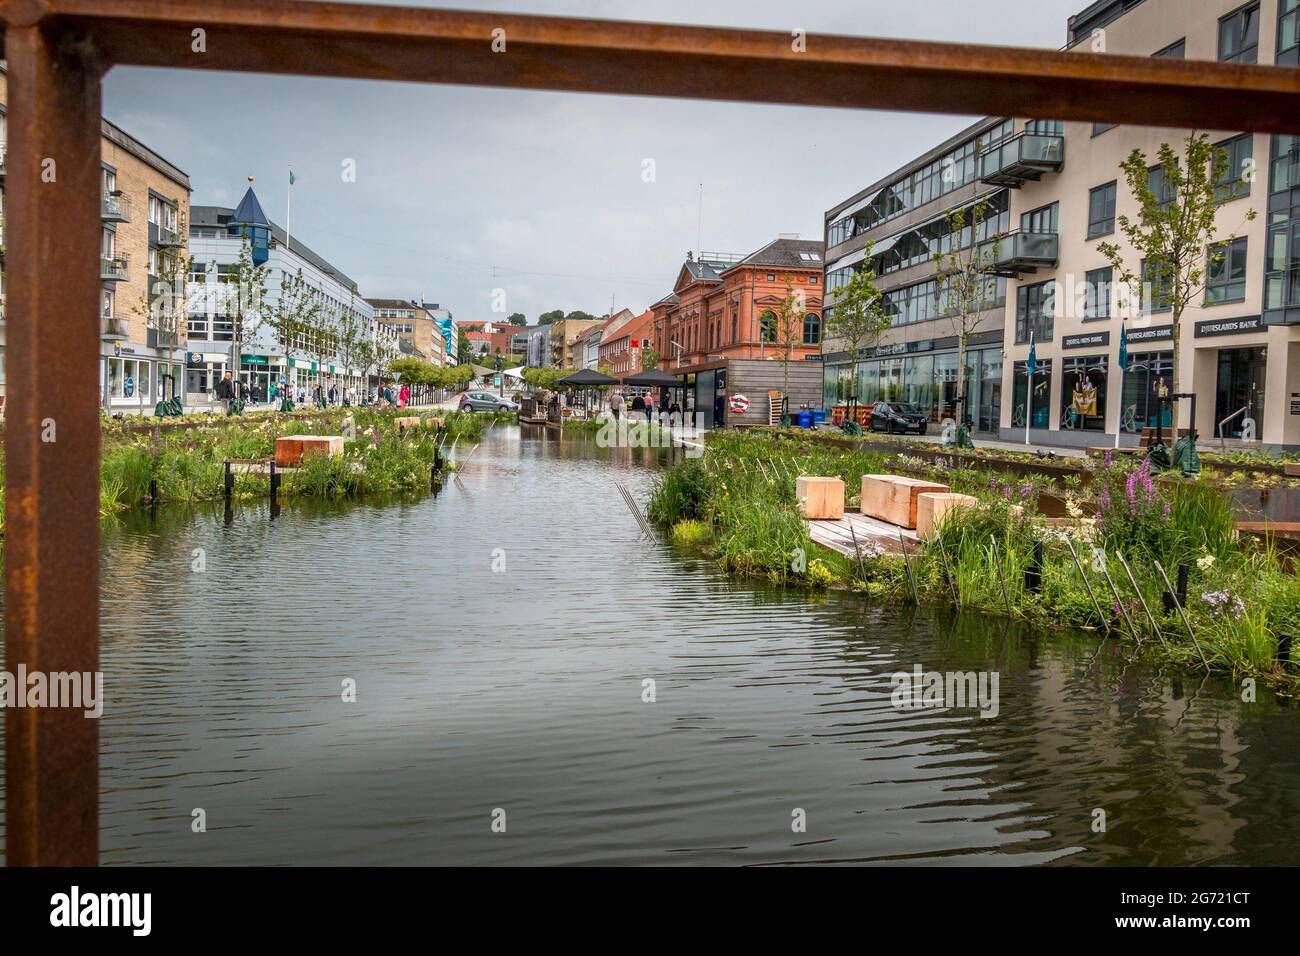 Randers, Denmark - 10-July-2021: The new rainwater basin at Ostervold in Randers, People look at flowers and nature, street resturant. Stock Photo